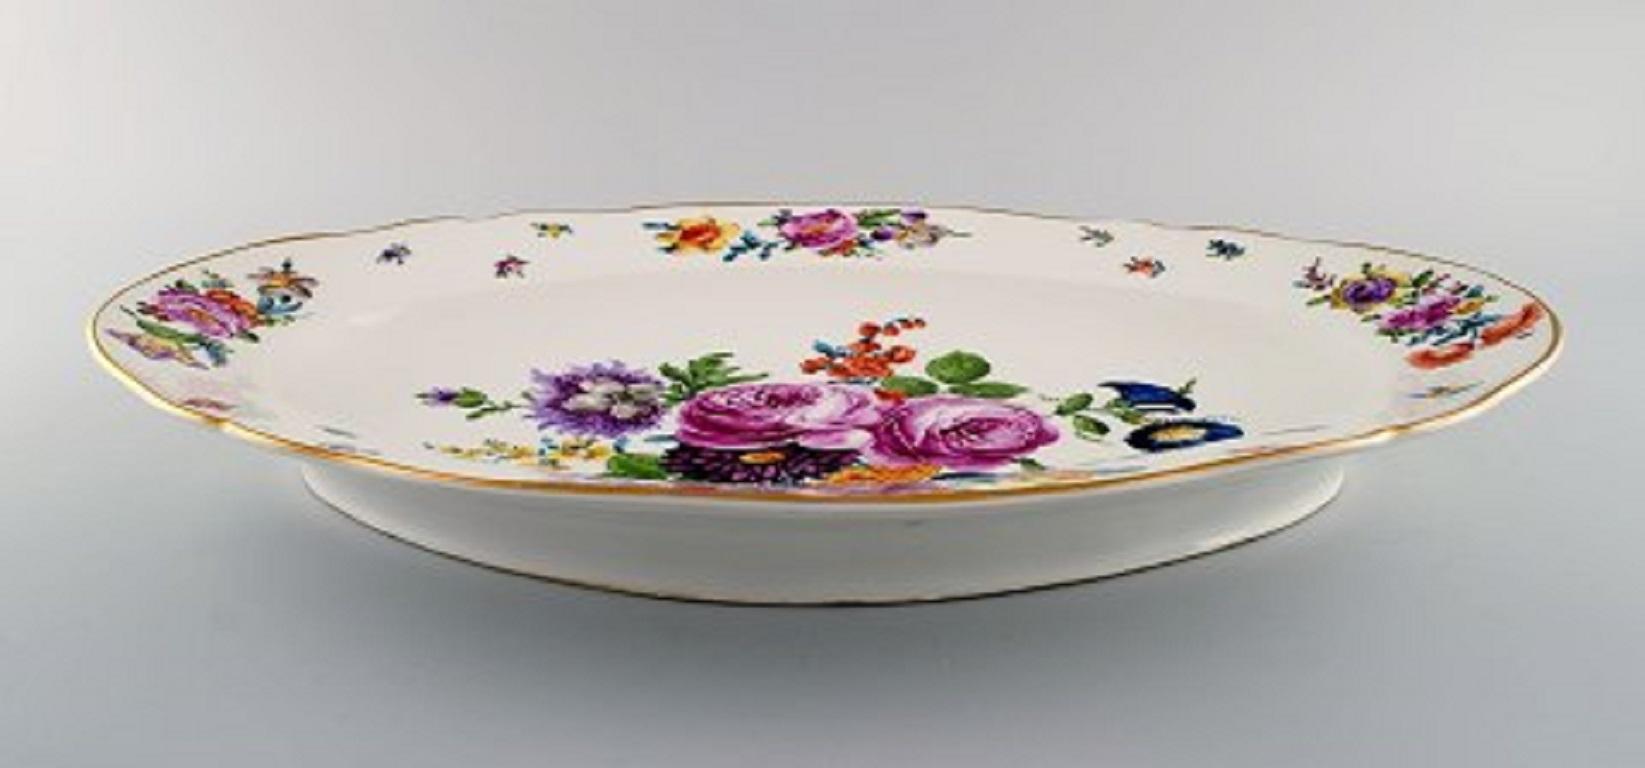 KPM, Berlin. Large antique dish in hand painted porcelain with floral motifs and gold edge, 19th century.
Measures: 49.5 x 35.5 x 6.5 cm.
In good condition.
Stamped.
Measures: 49.5 x 35.5 x 6.5 cm.
3rd factory quality.